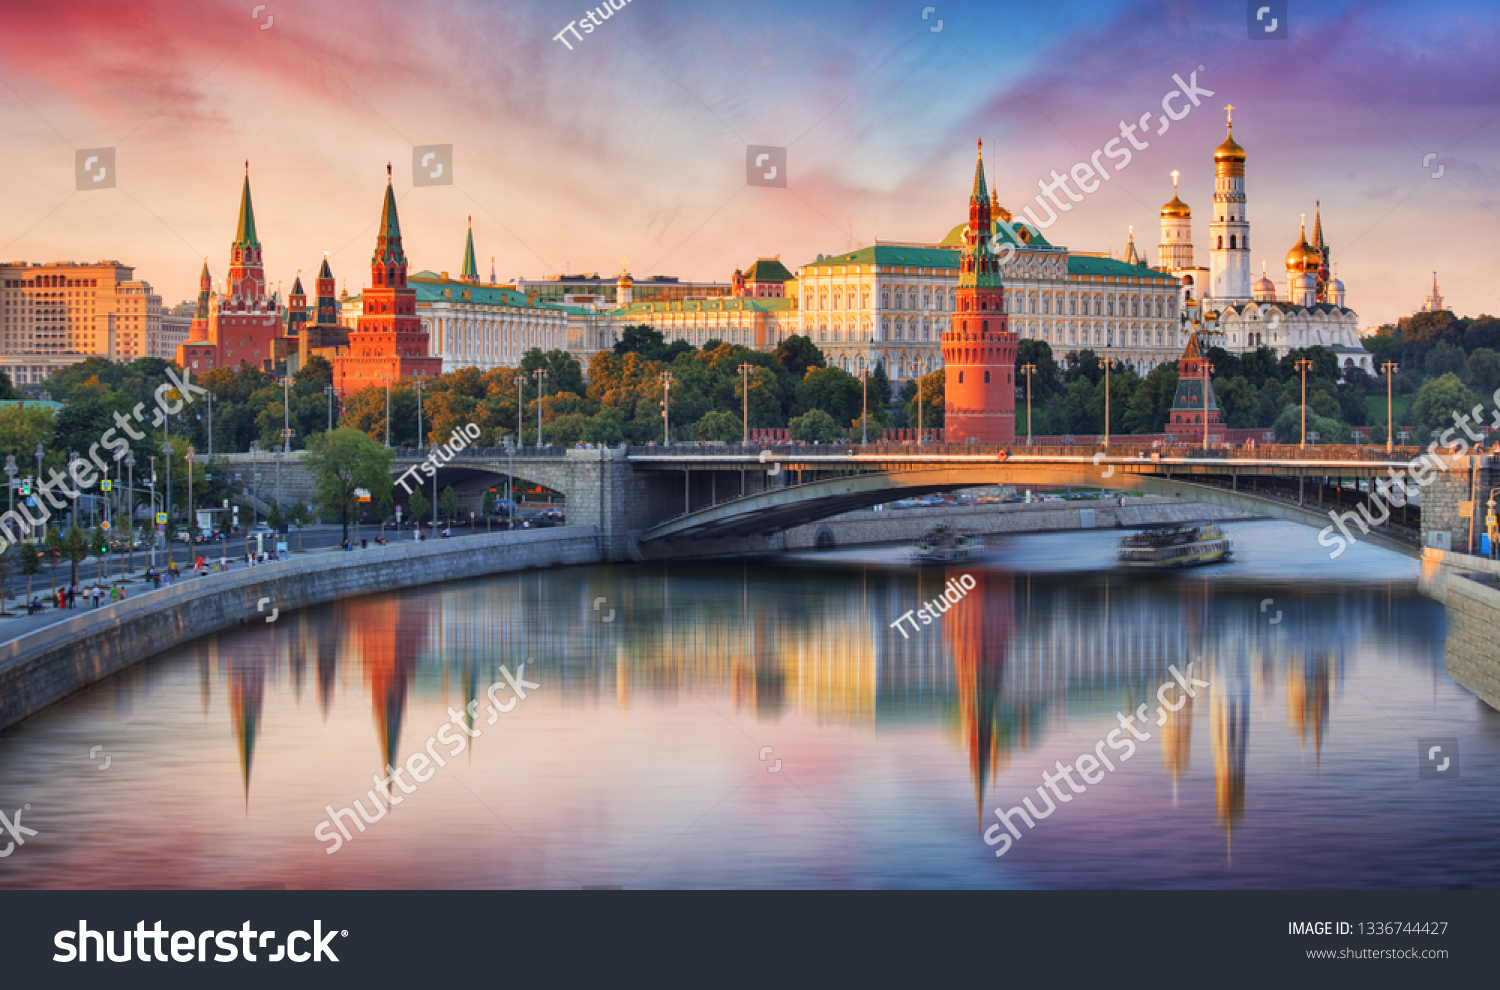 Moscow, Kremlin and Moskva River, Russia #1336744427